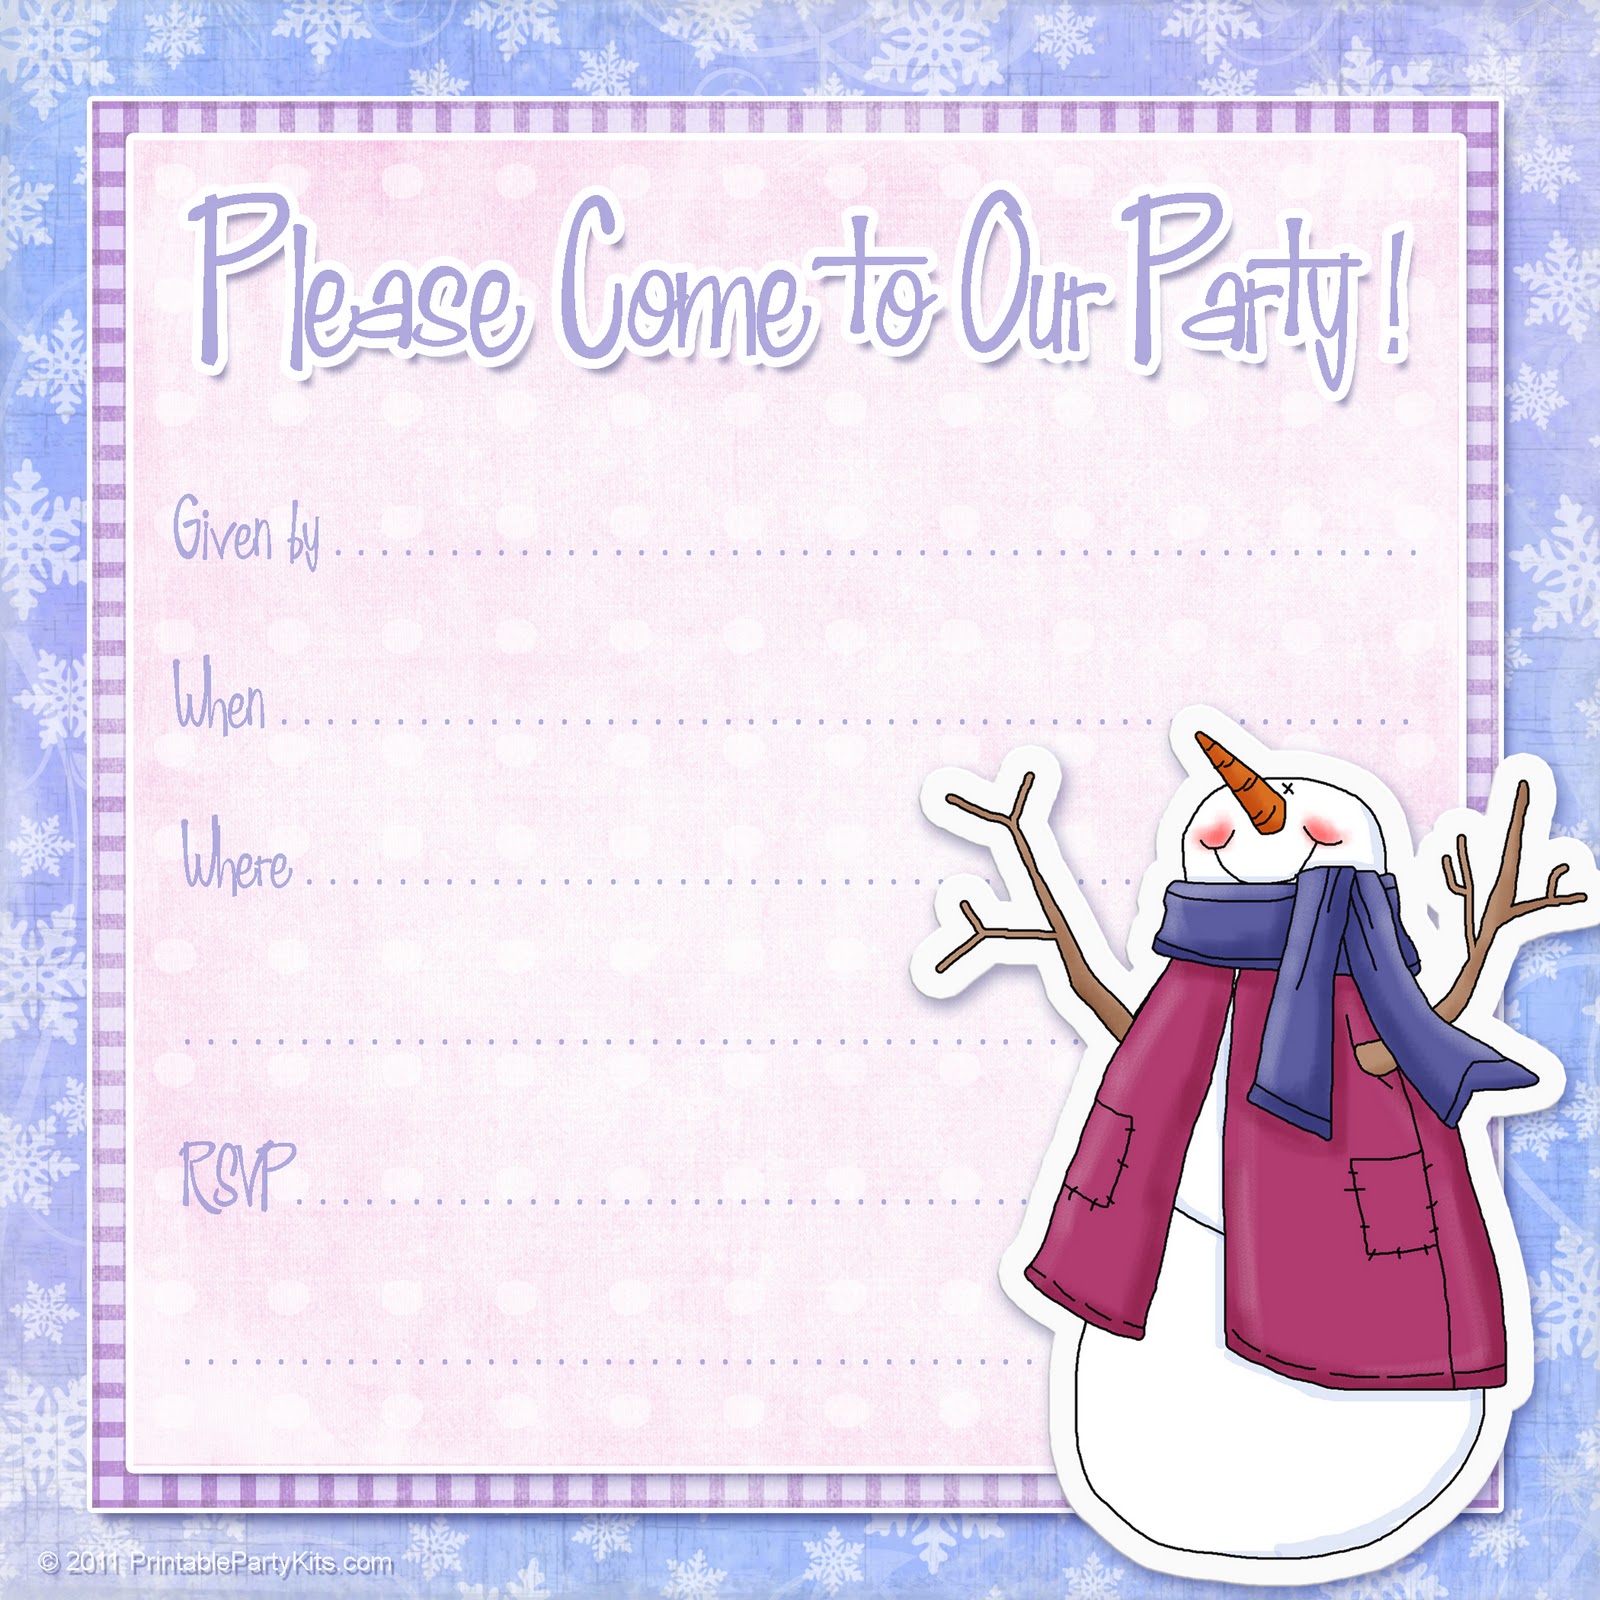 Free Printable Party Invitations Free Snowman Invite Template For A 